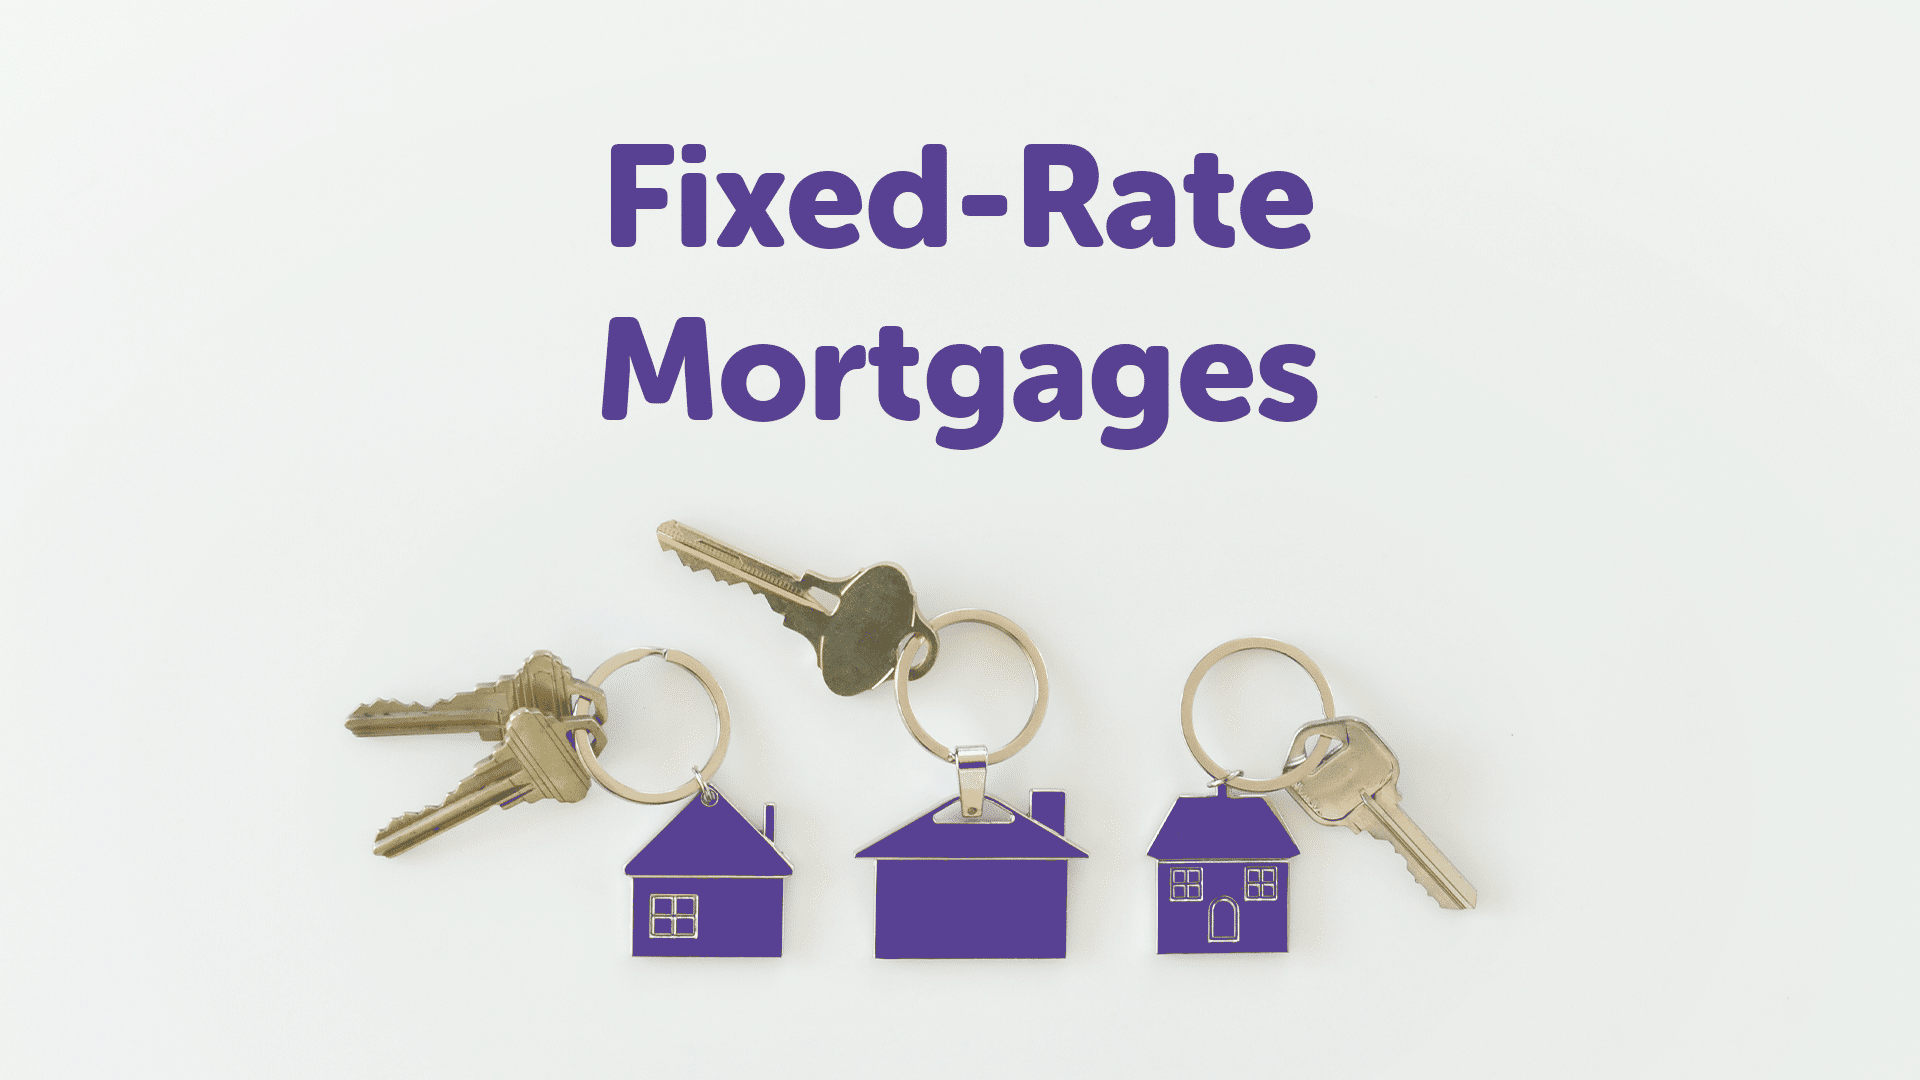 How Long Should I Fix My Mortgage For in Durham?